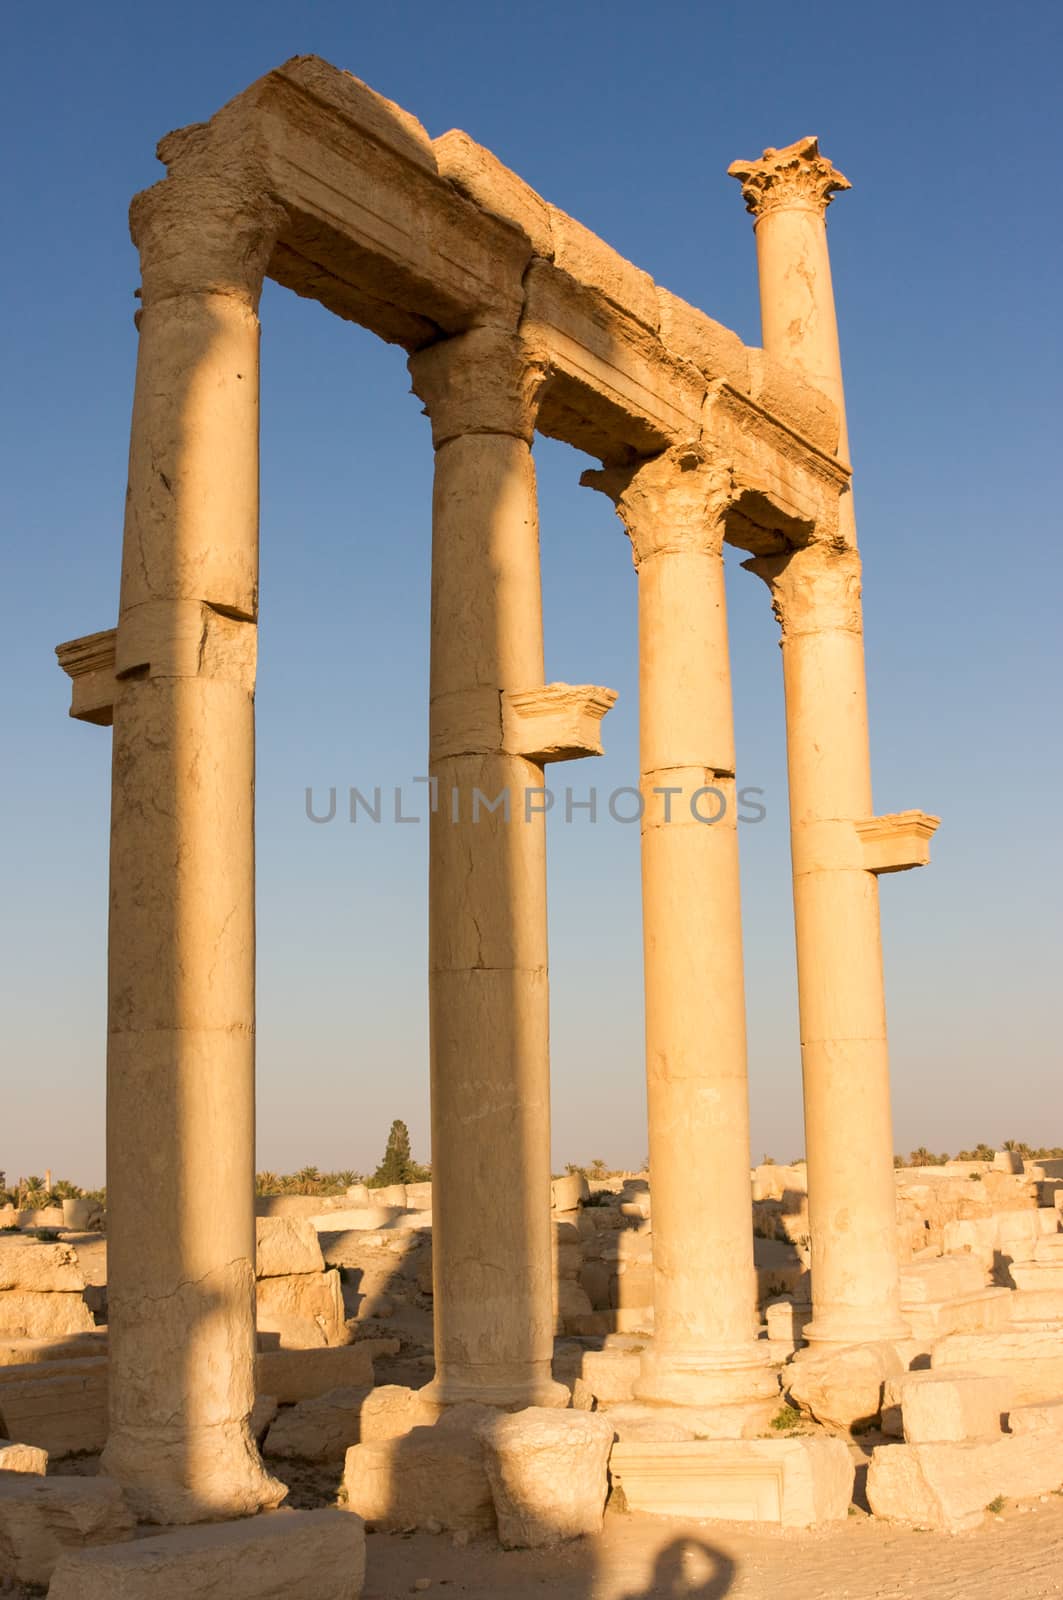 Palmyre Syria 2009 This ancient site has many Roman ruins, these standing columns shot in late afternoon sun . High quality photo